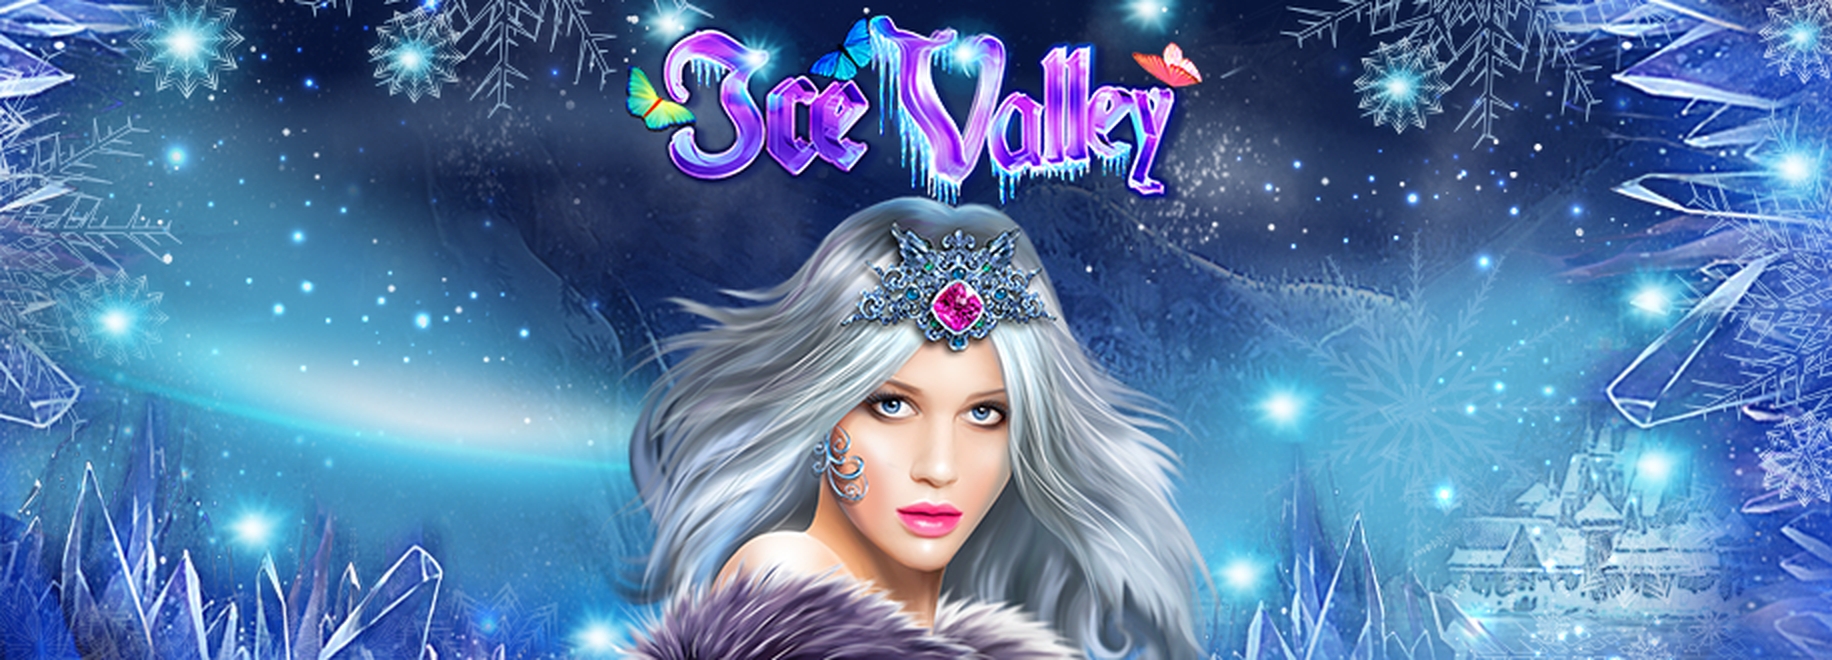 Ice Valley demo